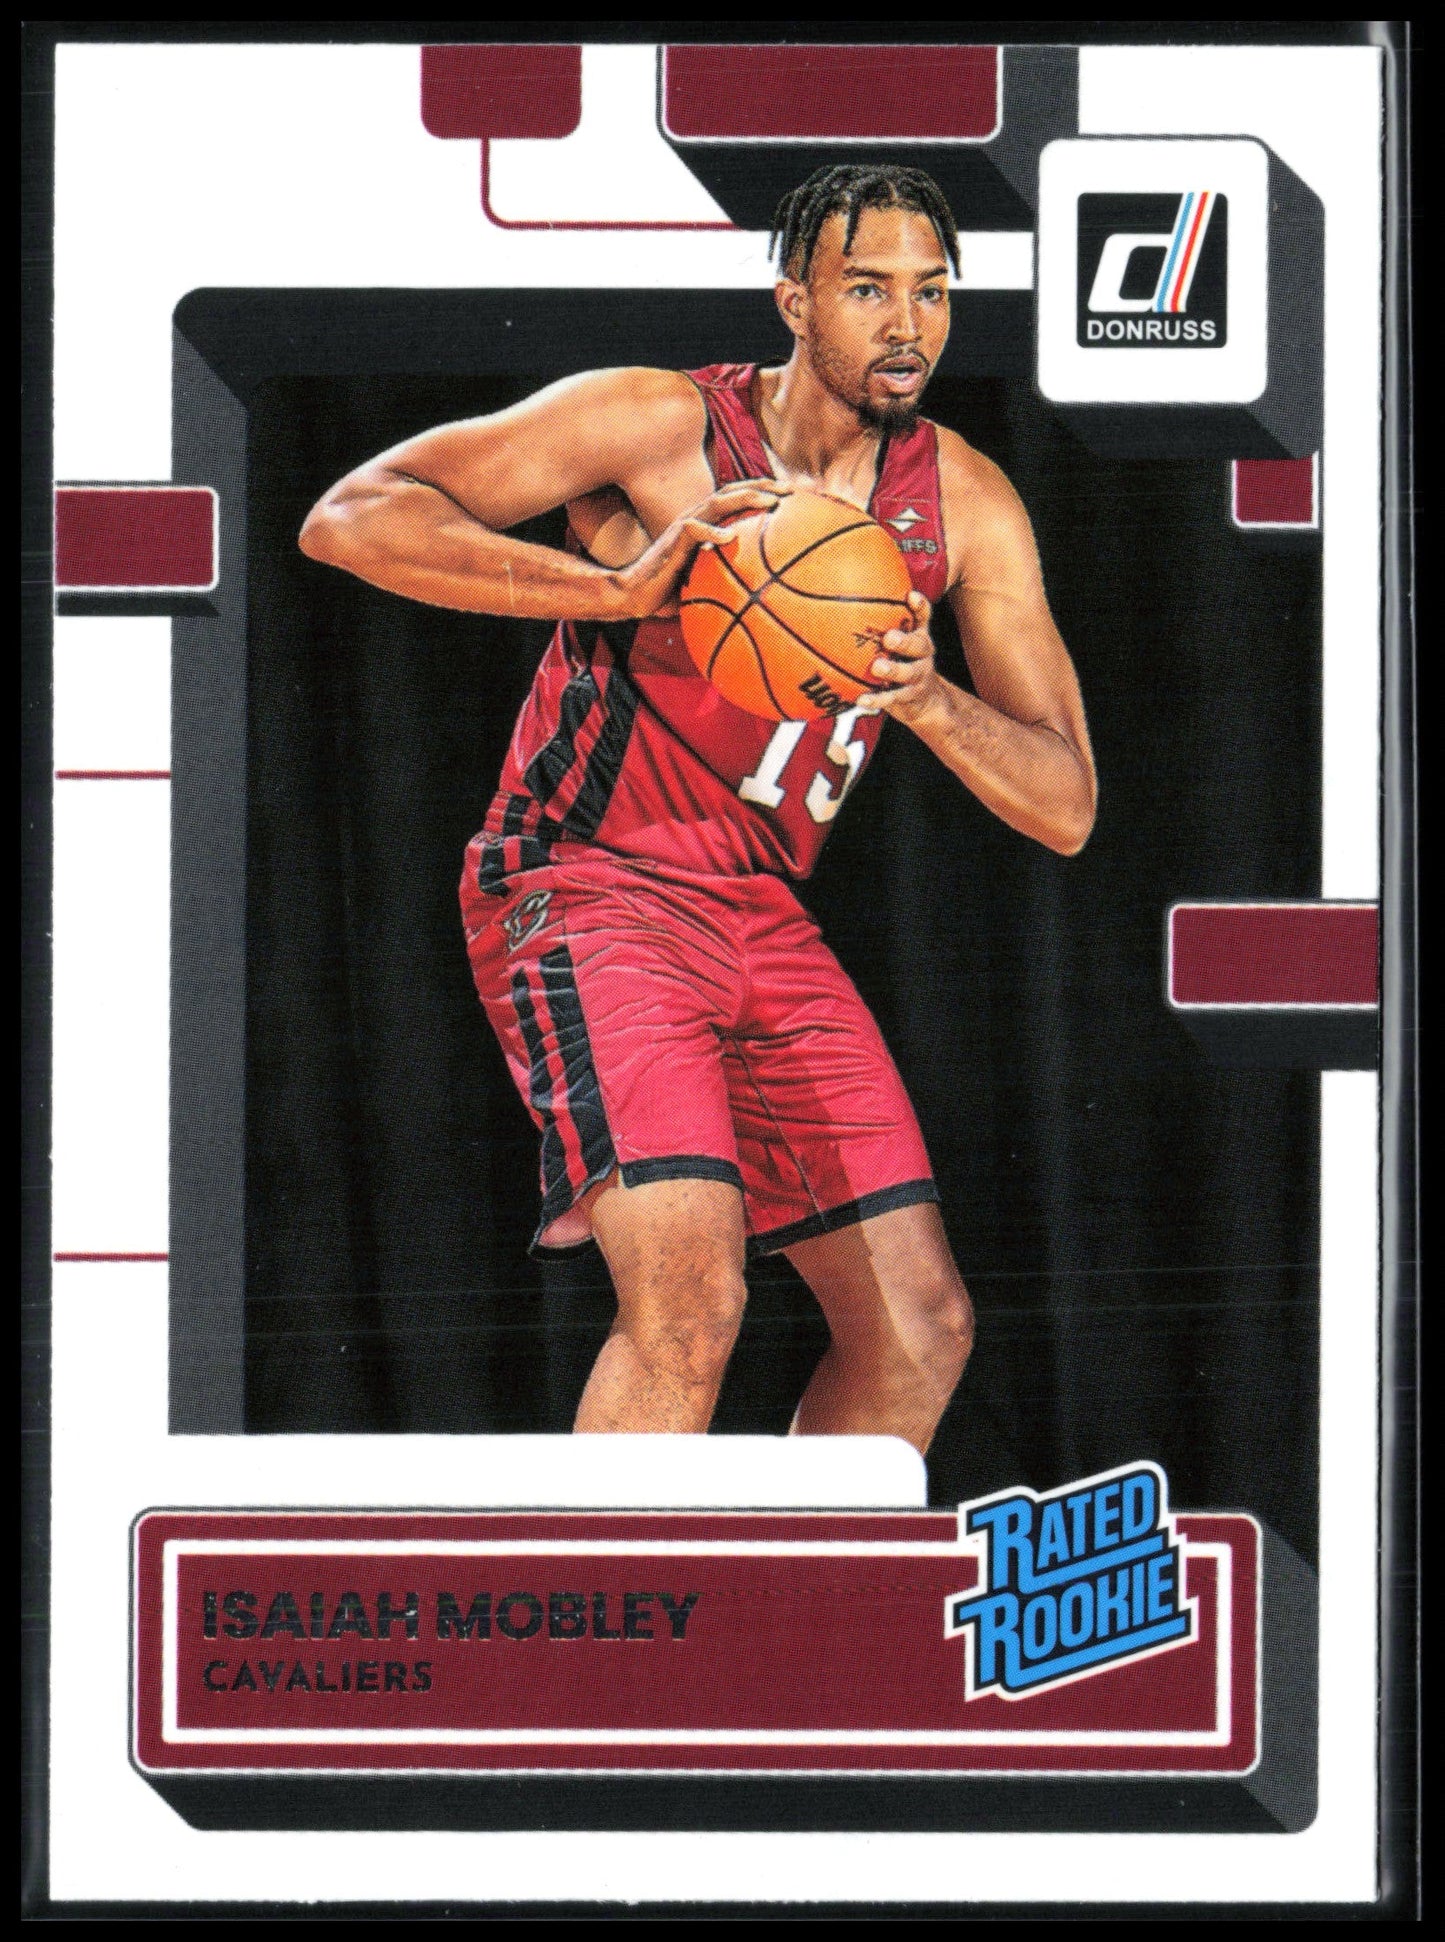 Isaiah Mobley RC